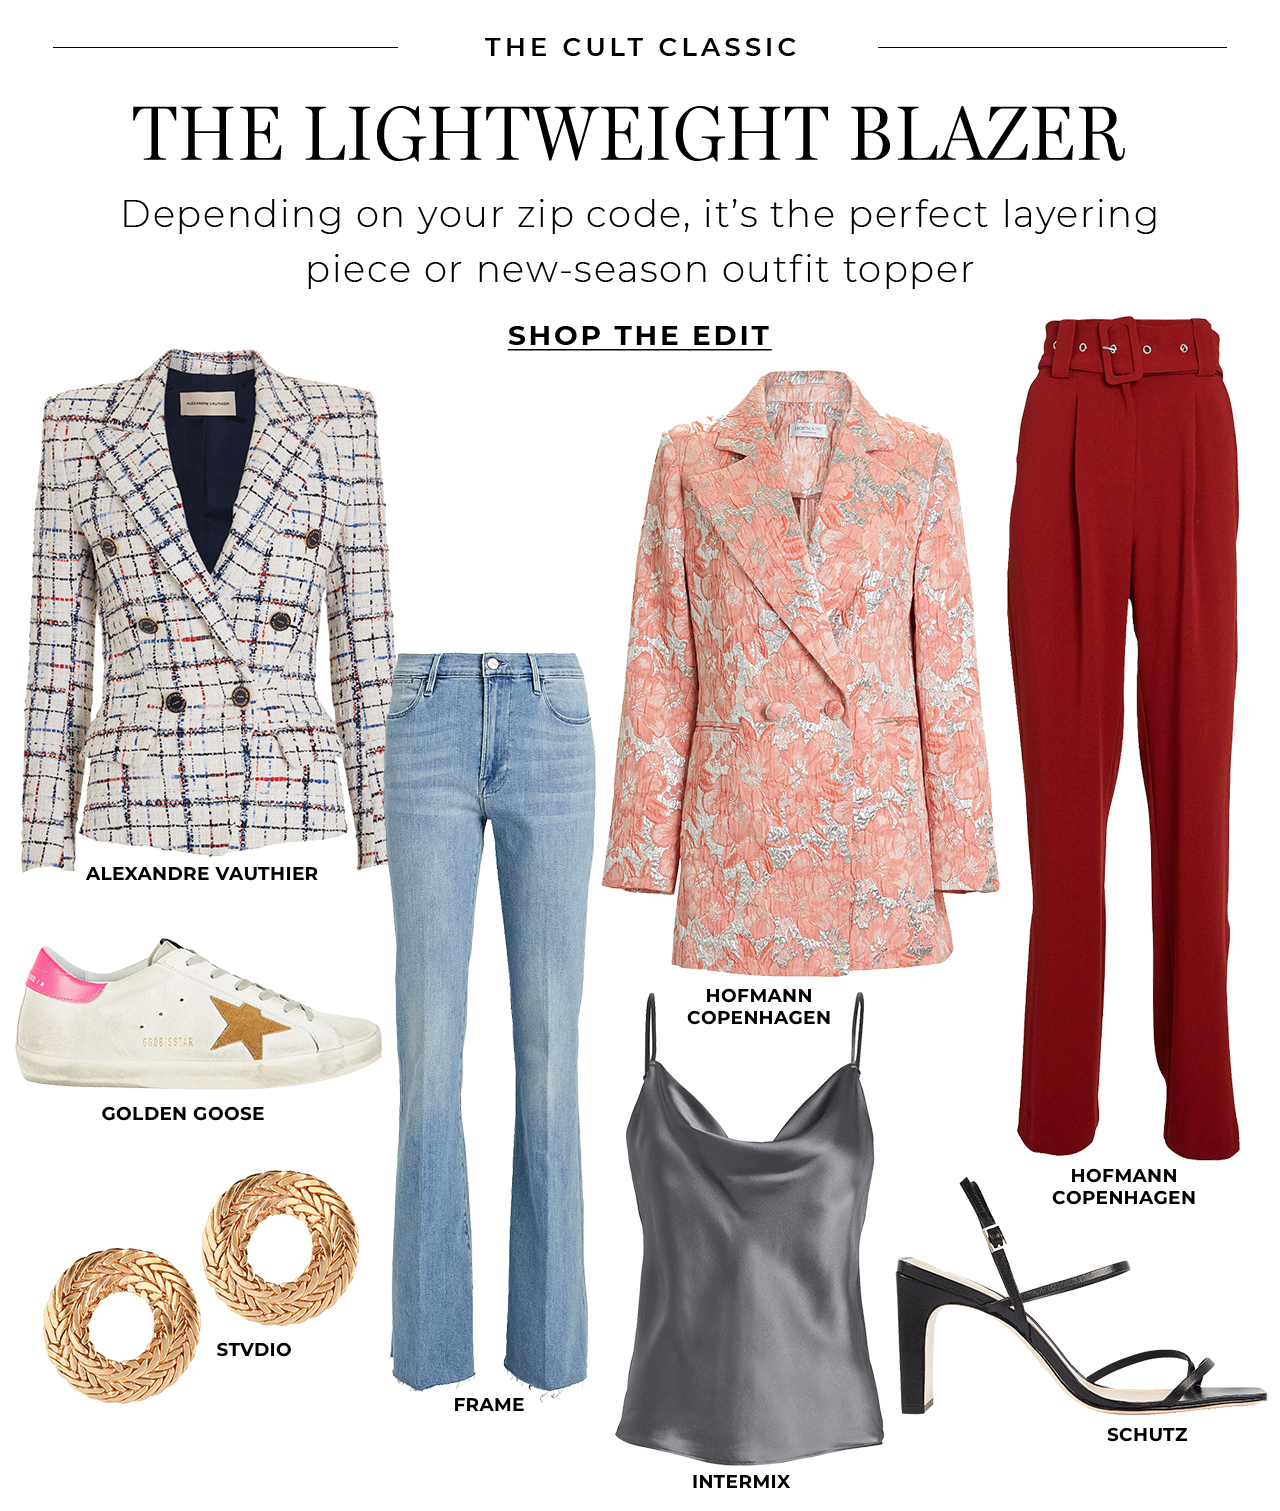 The lightweight blazer is the perfect layering piece